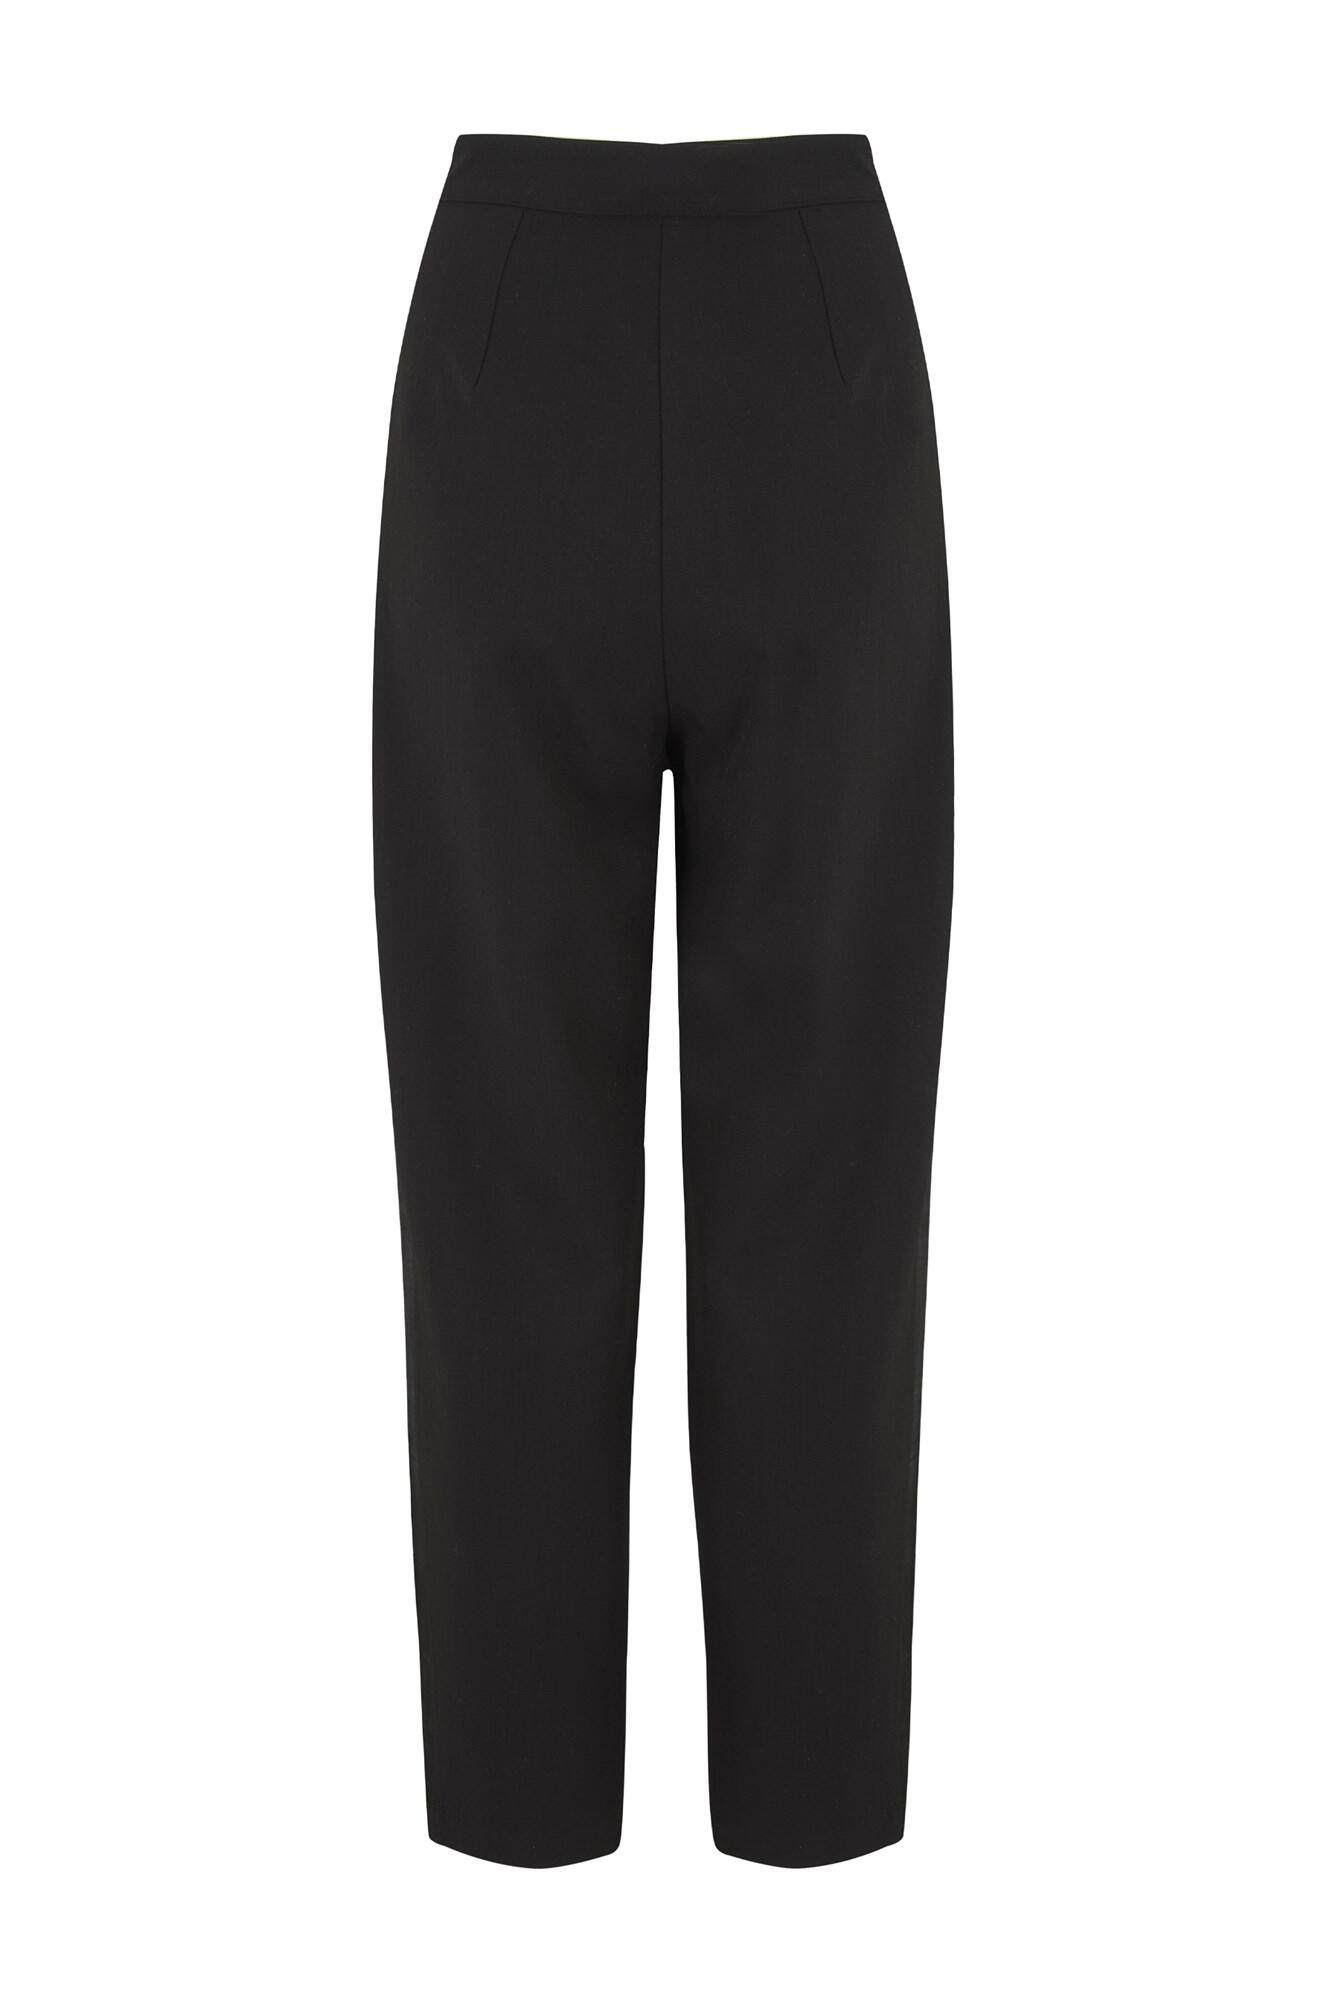 Womens Cigarette Trousers  Womens Trousers  House of Fraser